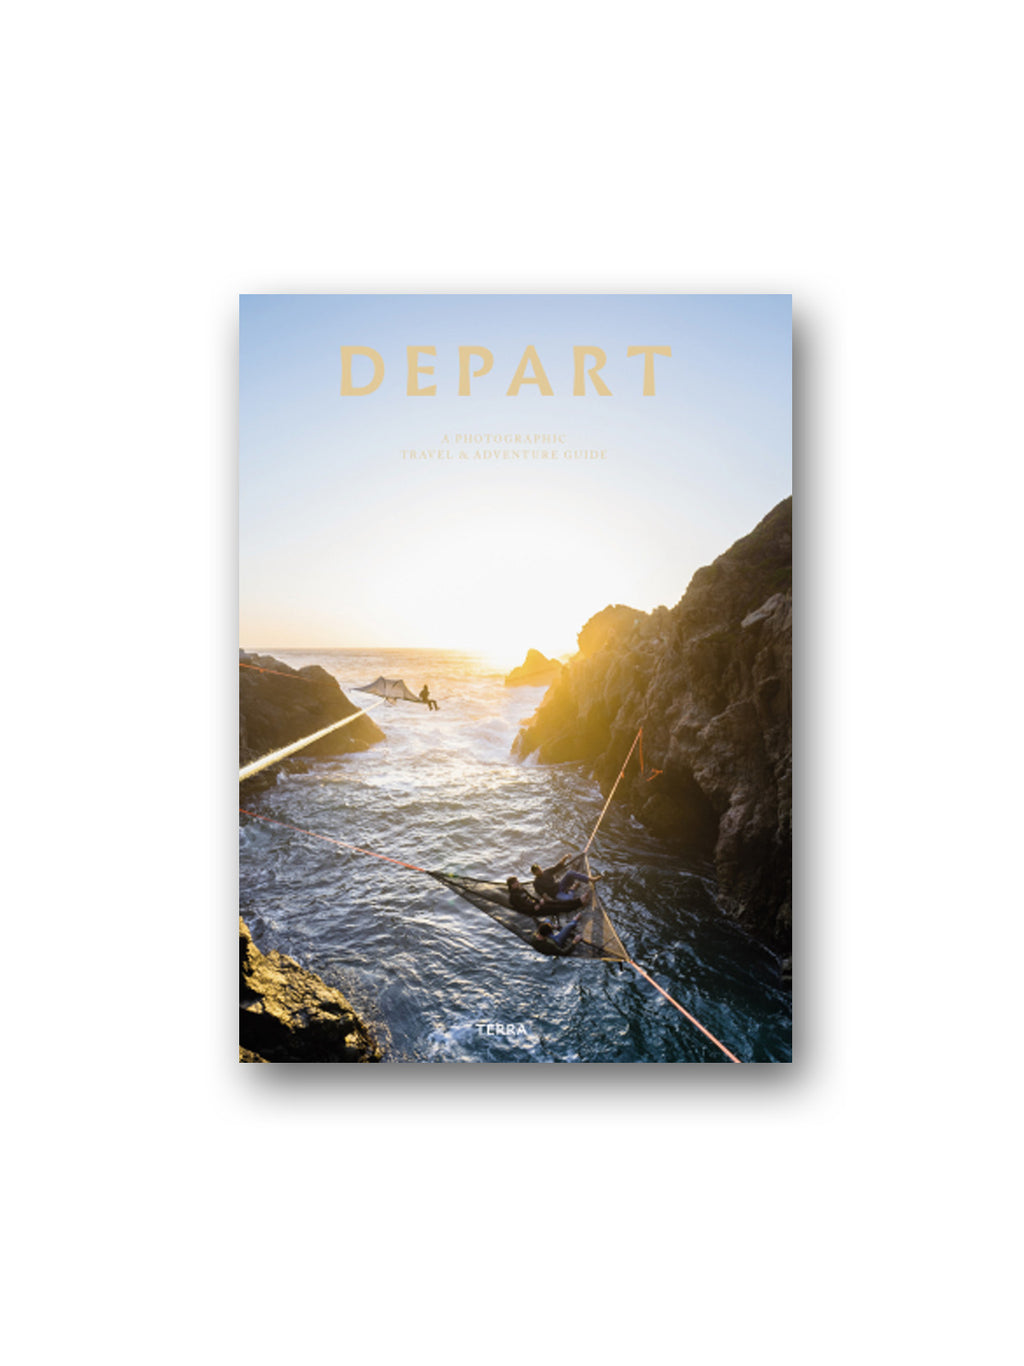 Depart : A Photographic Travel & Adventure Guide